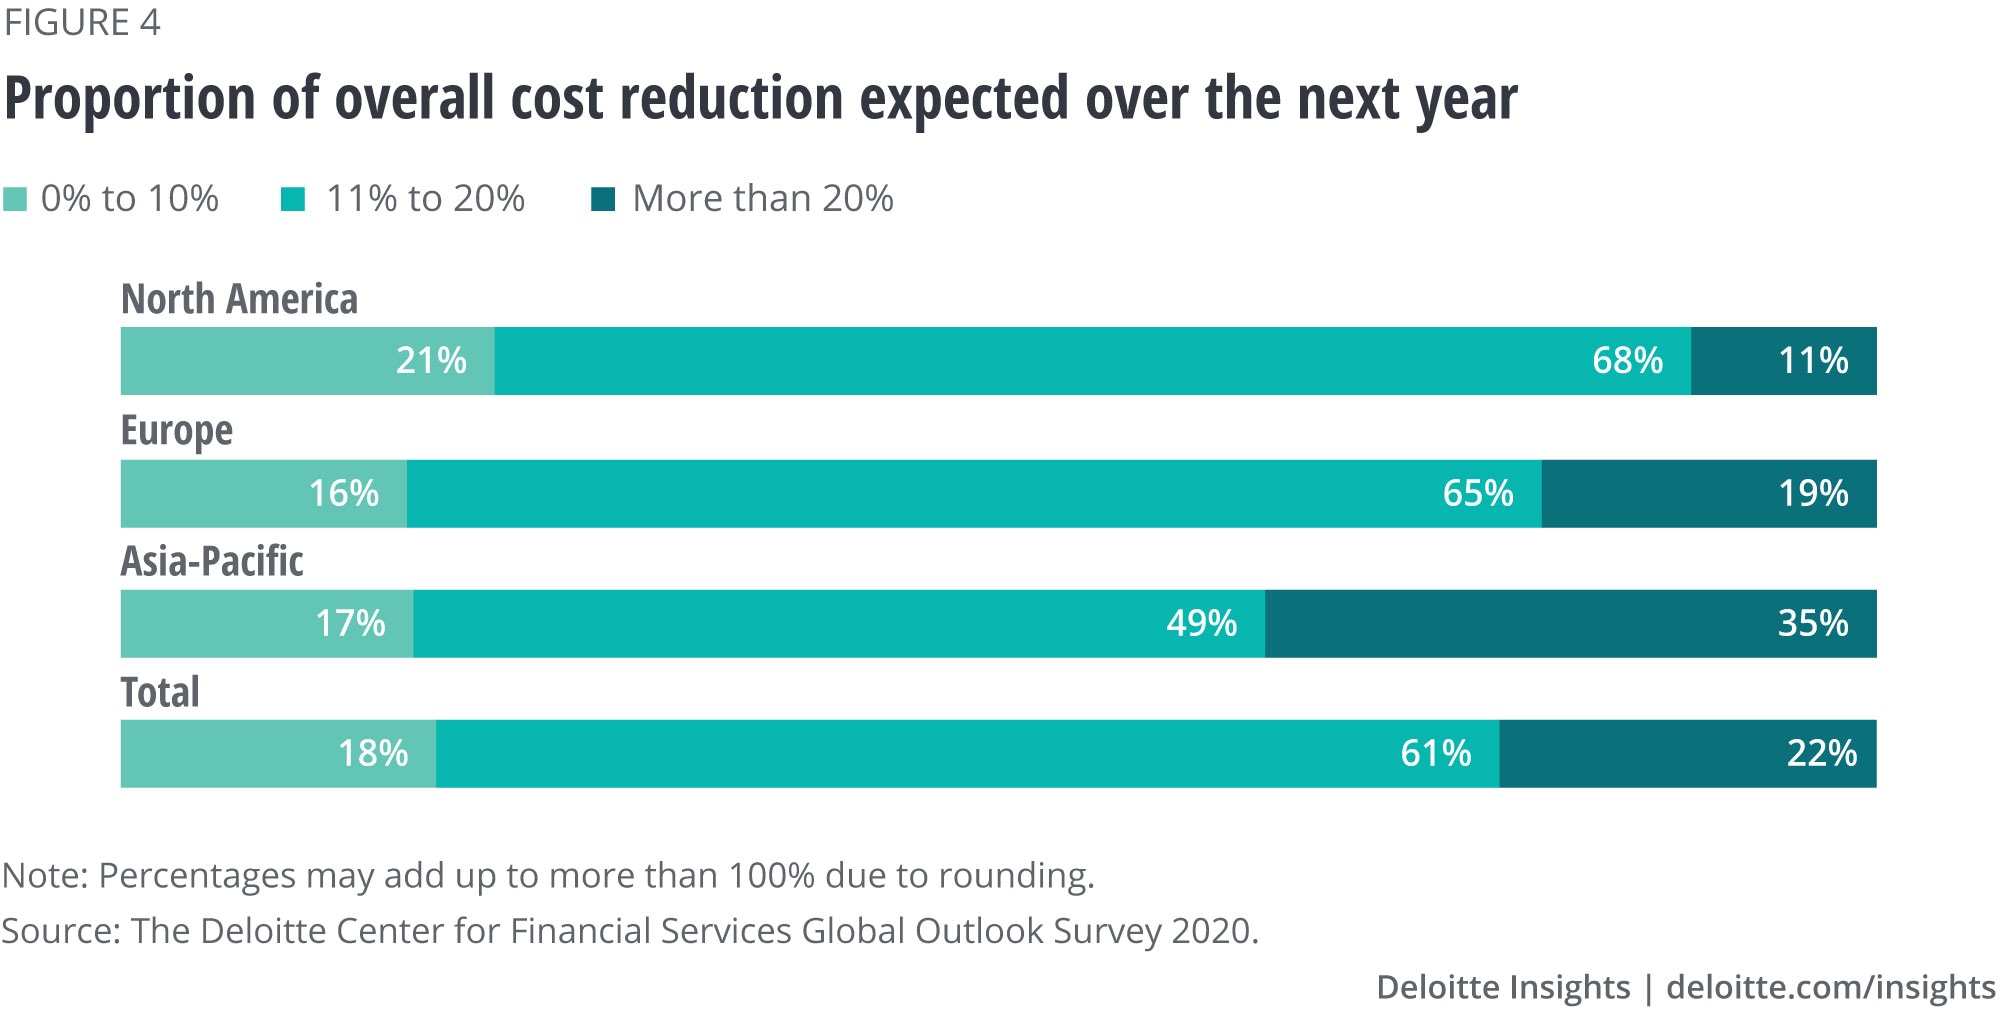 Proportion of overall cost reduction expected for the next year